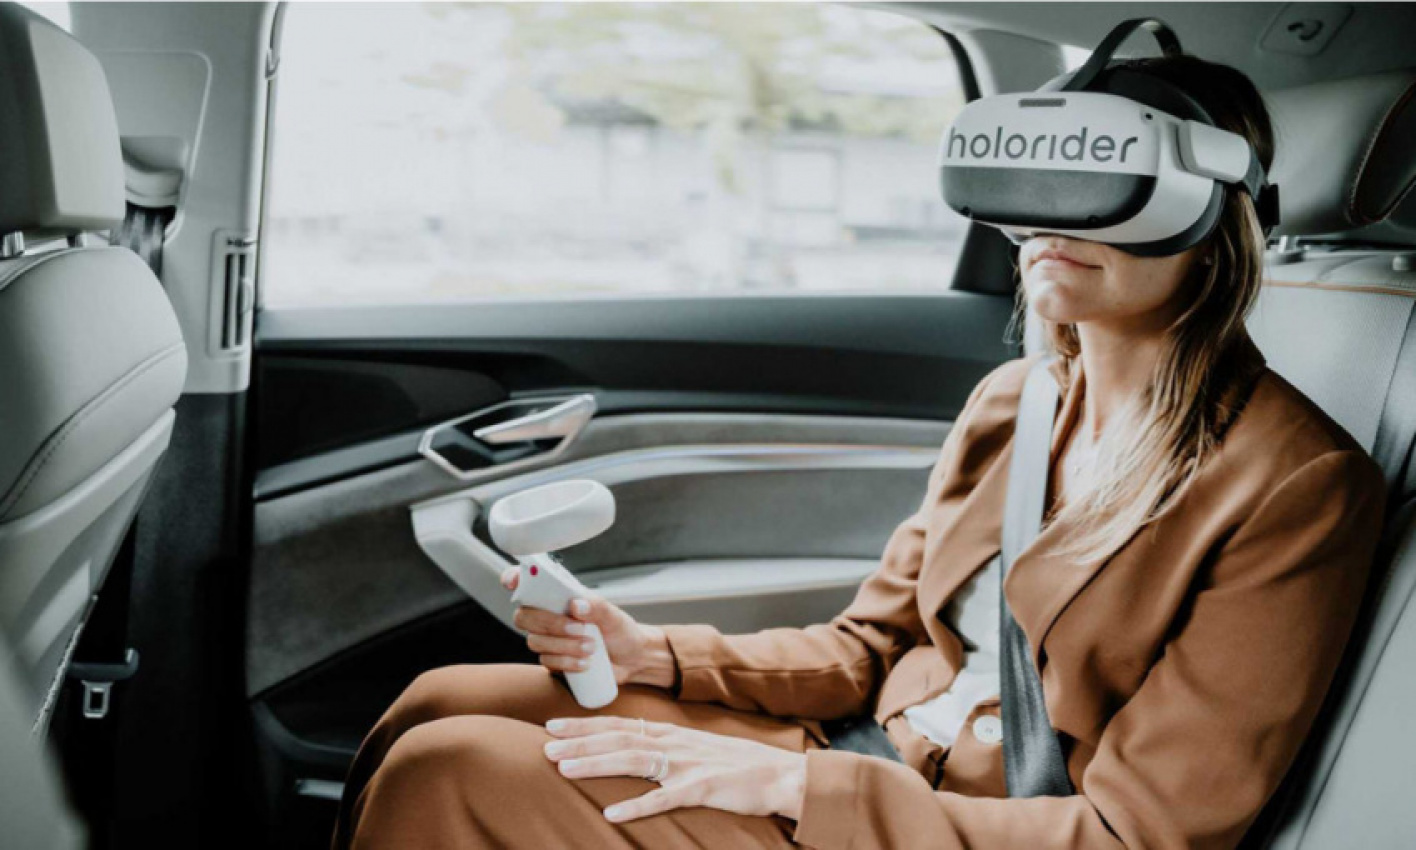 audi, autos, cars, industry news, e-tron, extended reality, holoride, industry news, virtual reality, vr, xr, the future is upon us with audi’s holoride virtual reality